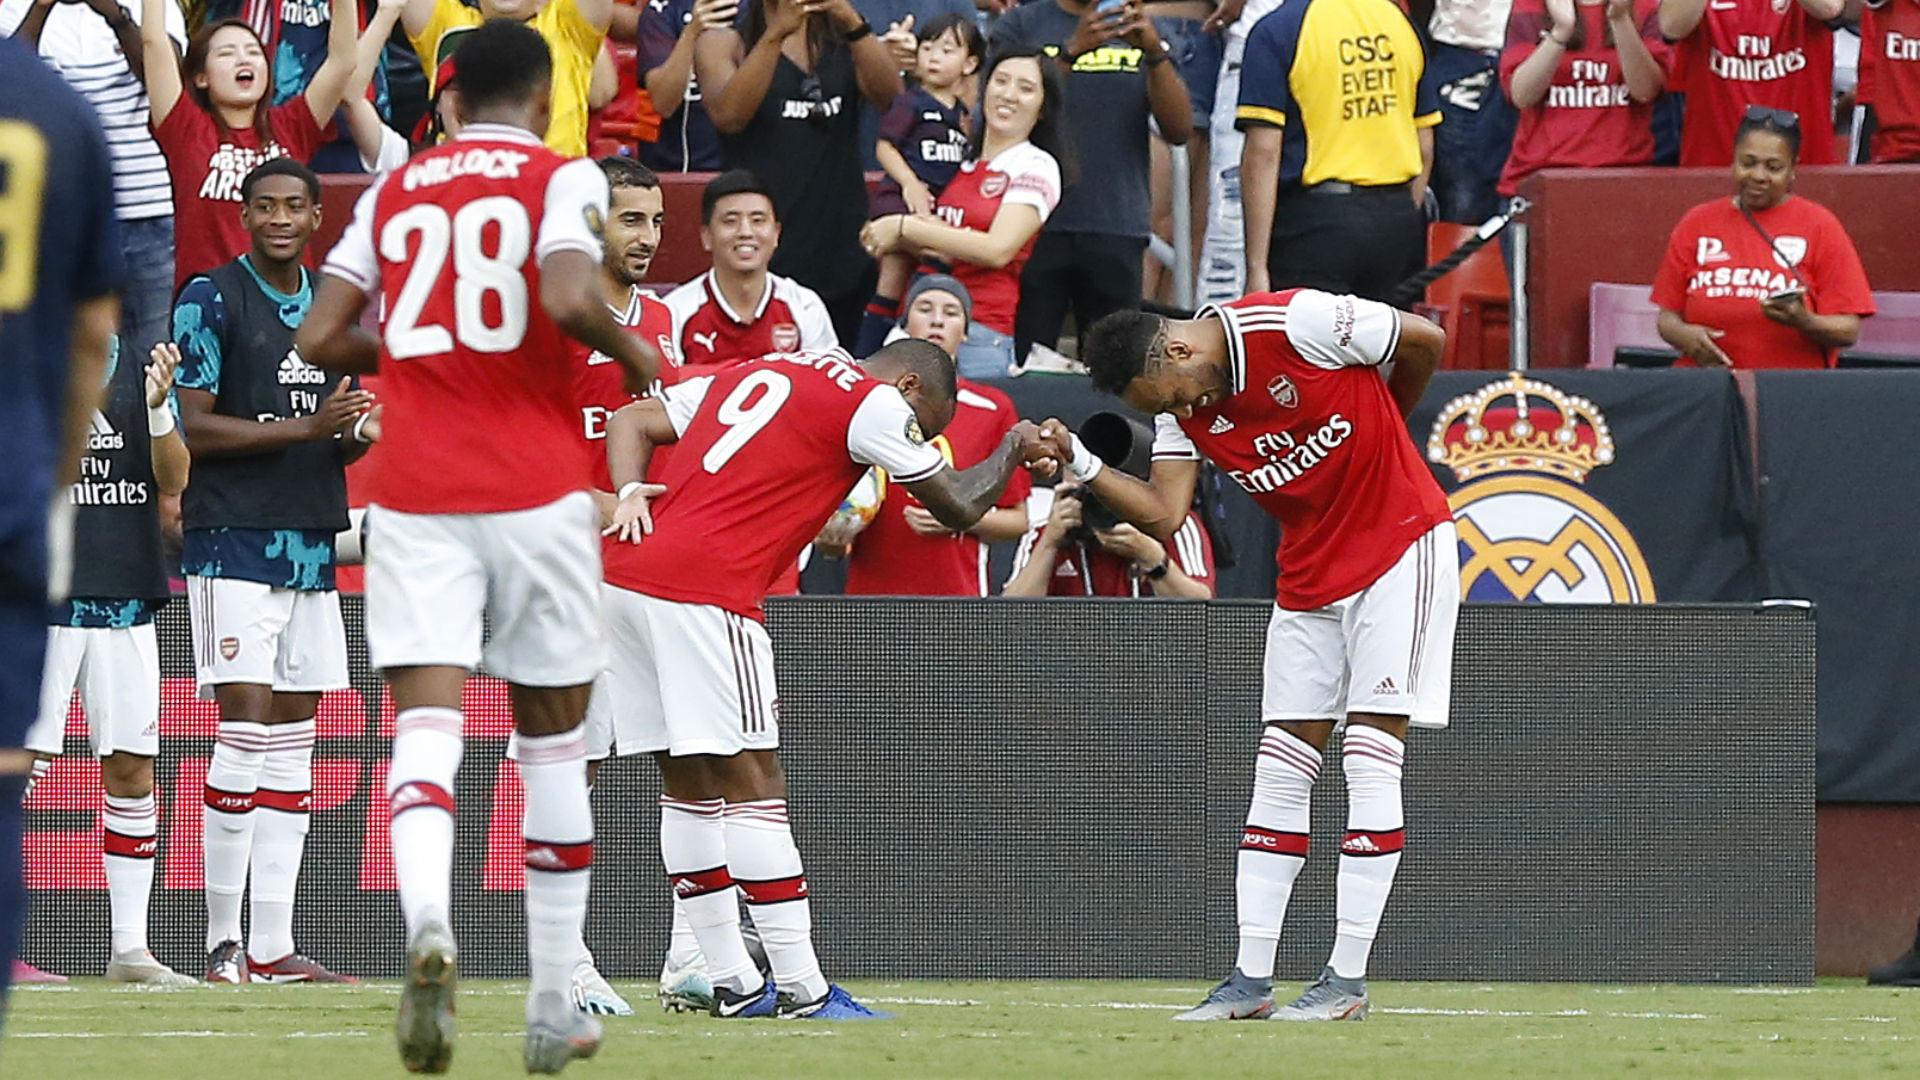 Arsenal Real Madrid Friendly Brings Spectacle, Physicality